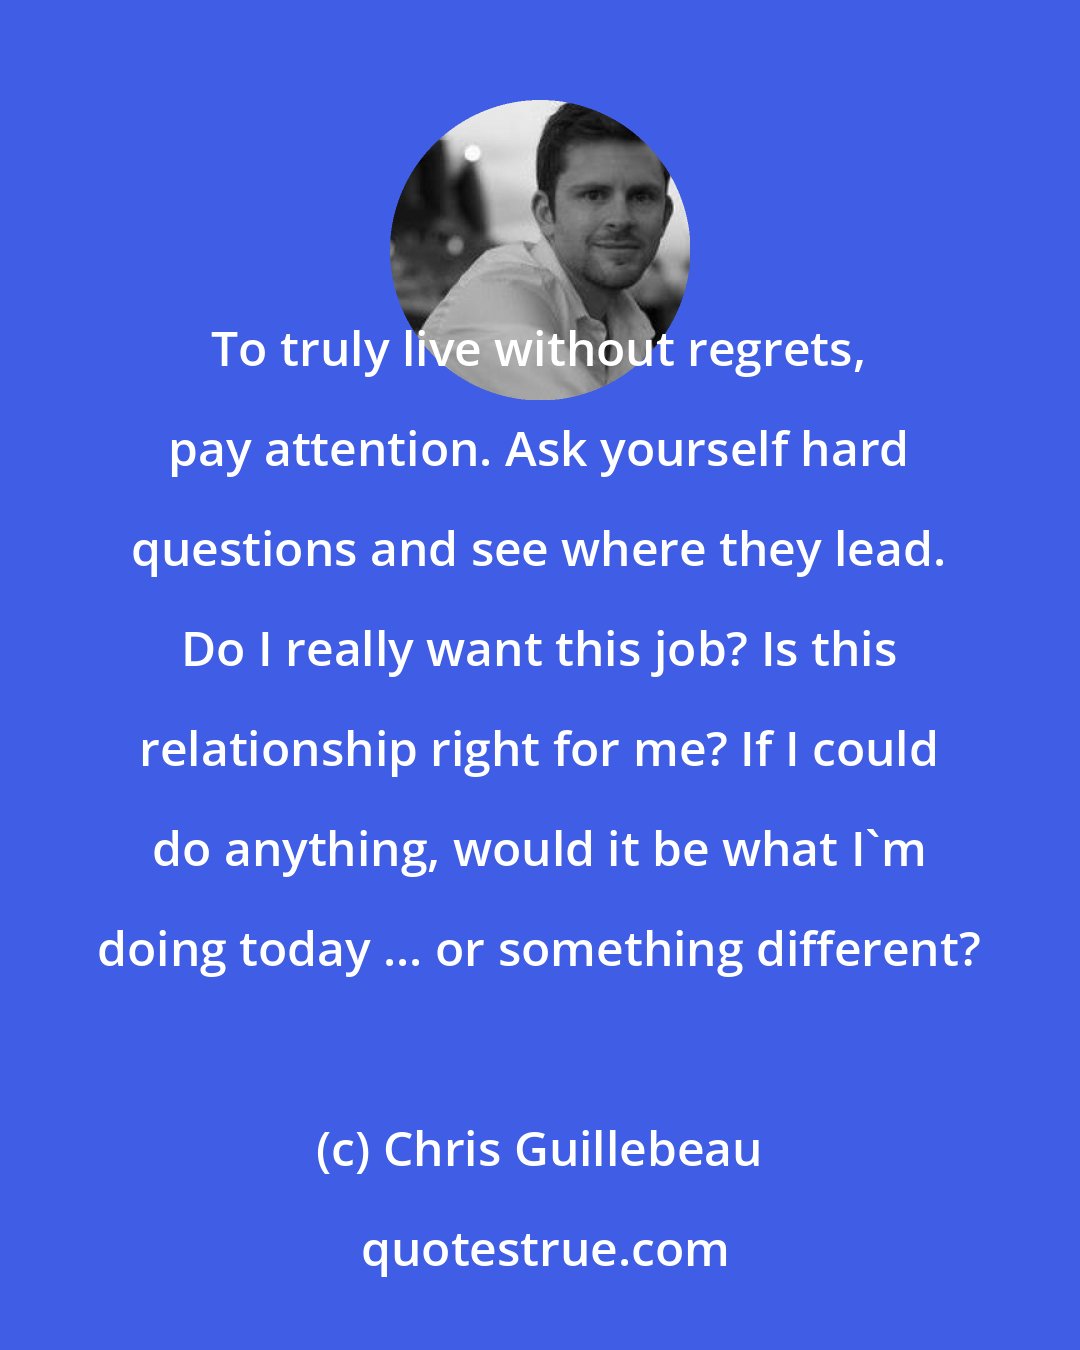 Chris Guillebeau: To truly live without regrets, pay attention. Ask yourself hard questions and see where they lead. Do I really want this job? Is this relationship right for me? If I could do anything, would it be what I'm doing today ... or something different?